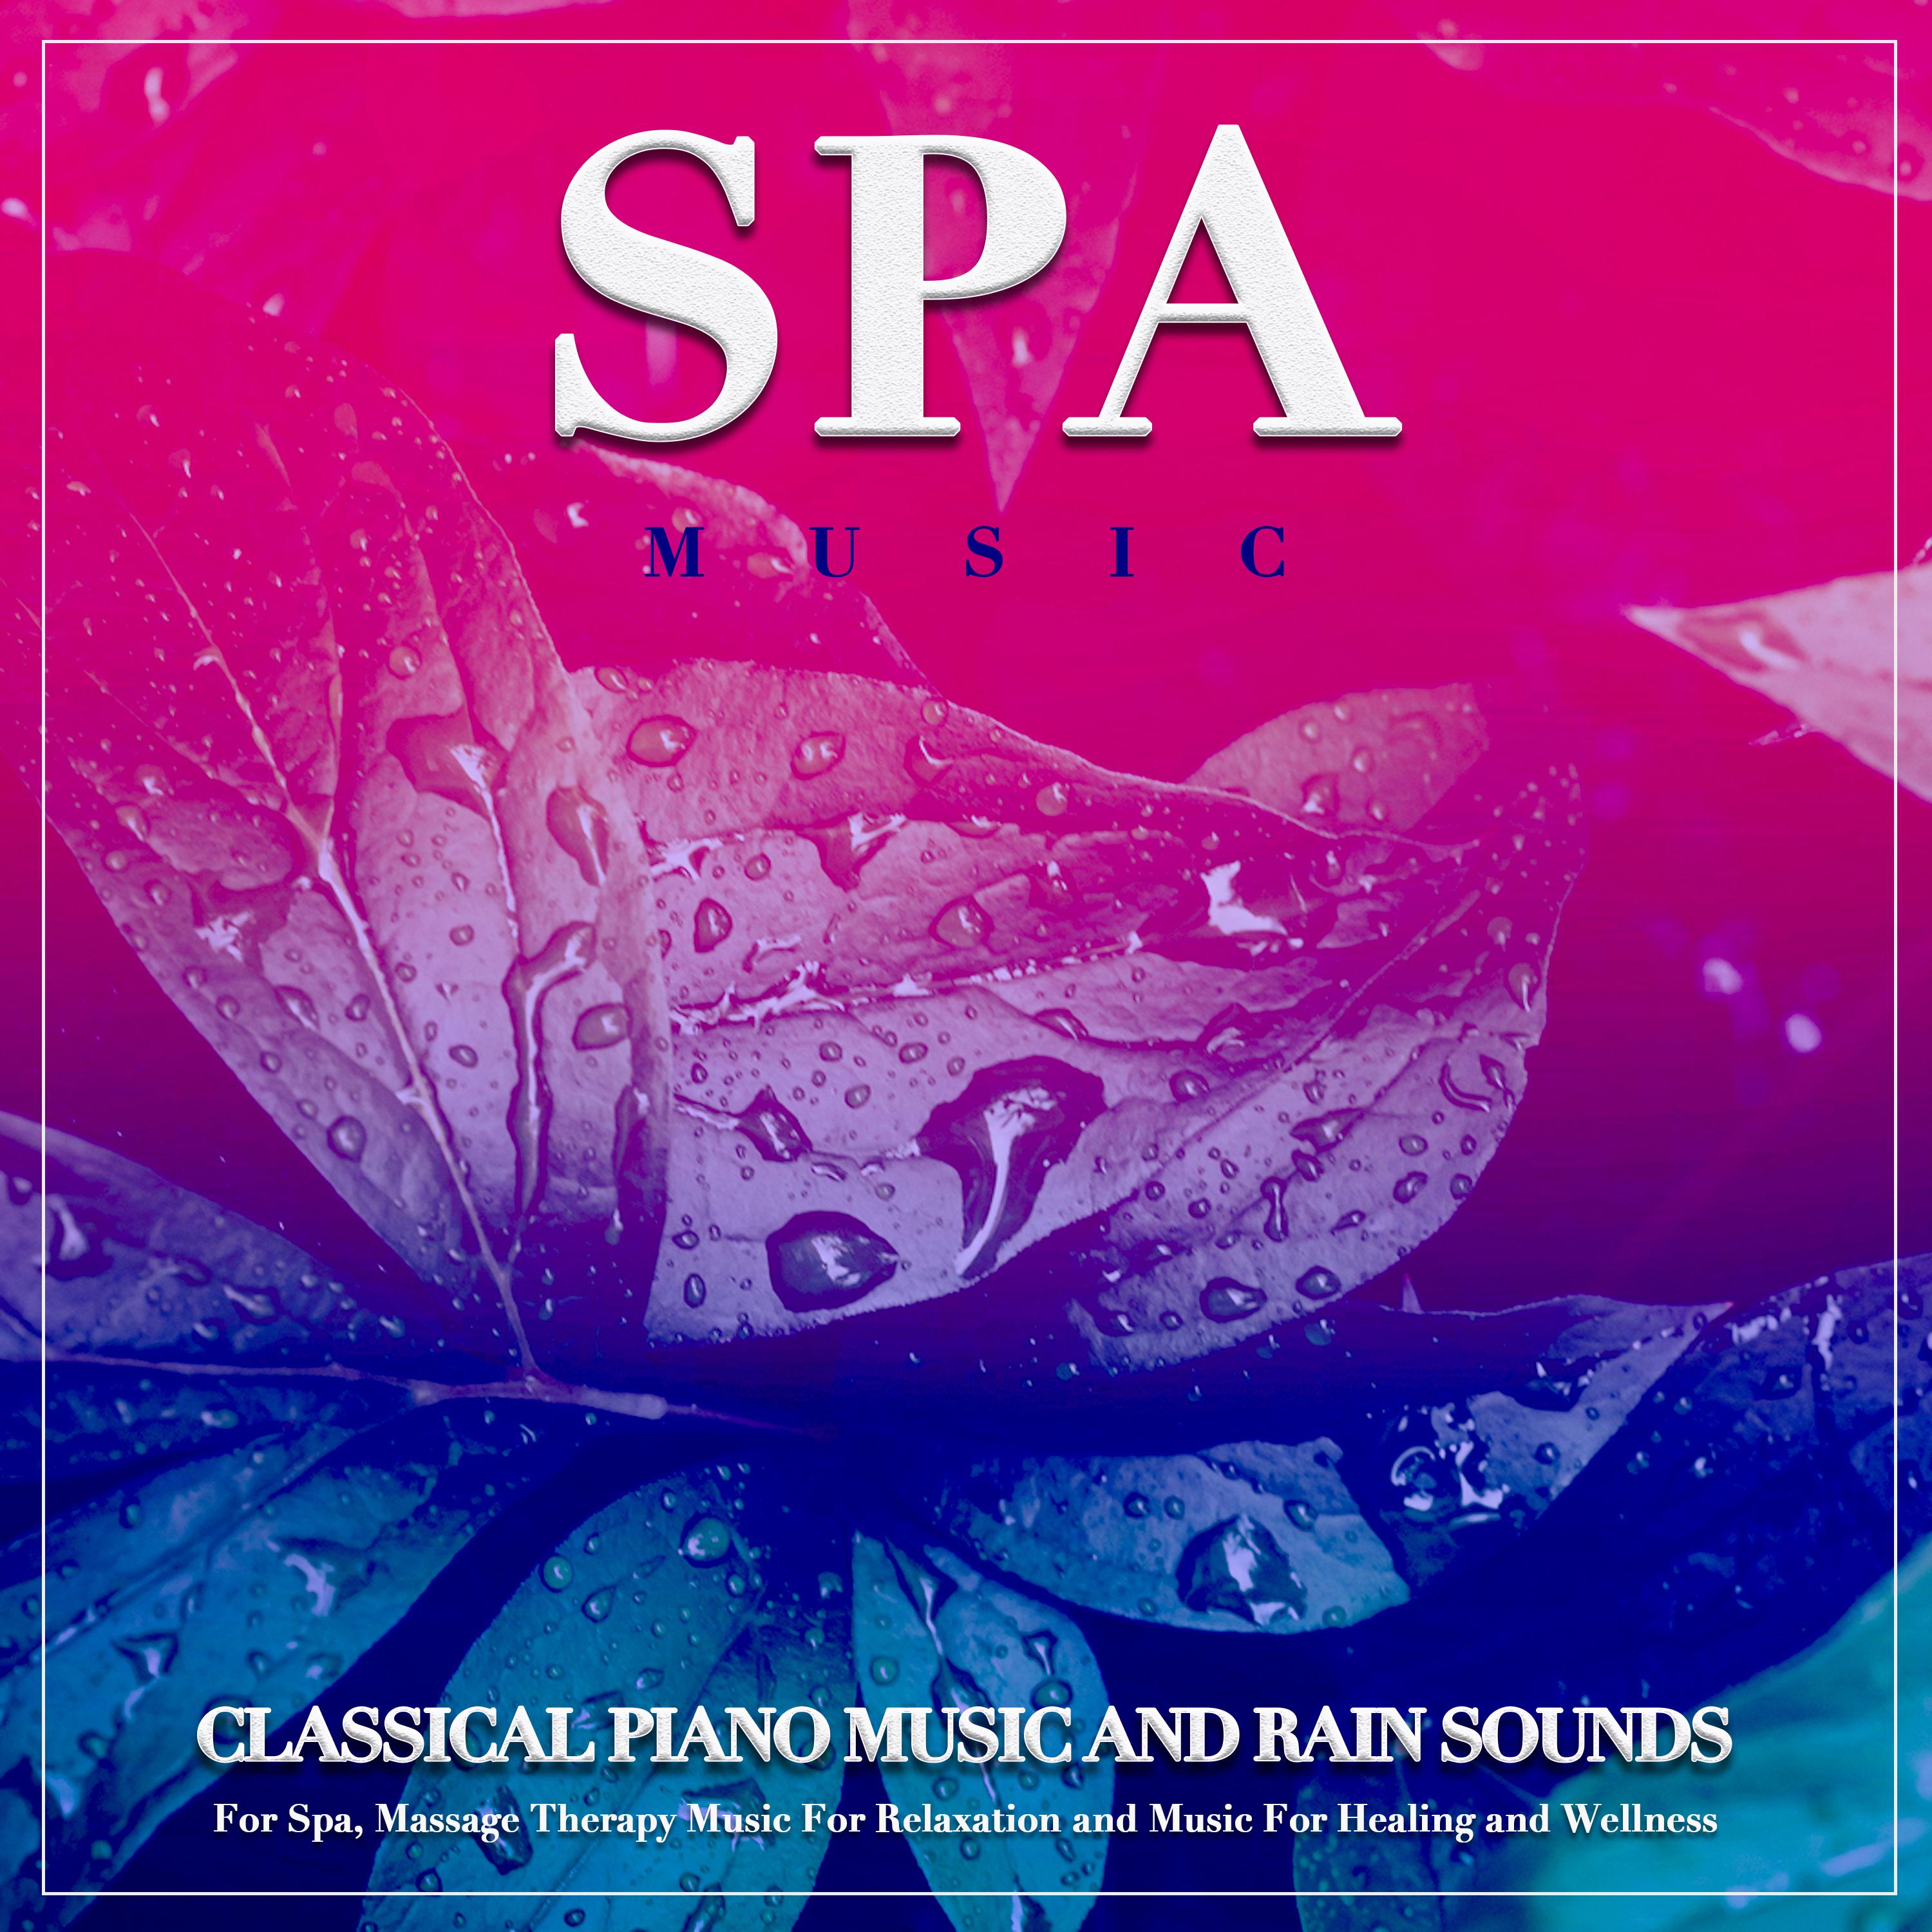 Des Abends - Schumann - Classical Piano and Rain Sounds - Spa Music